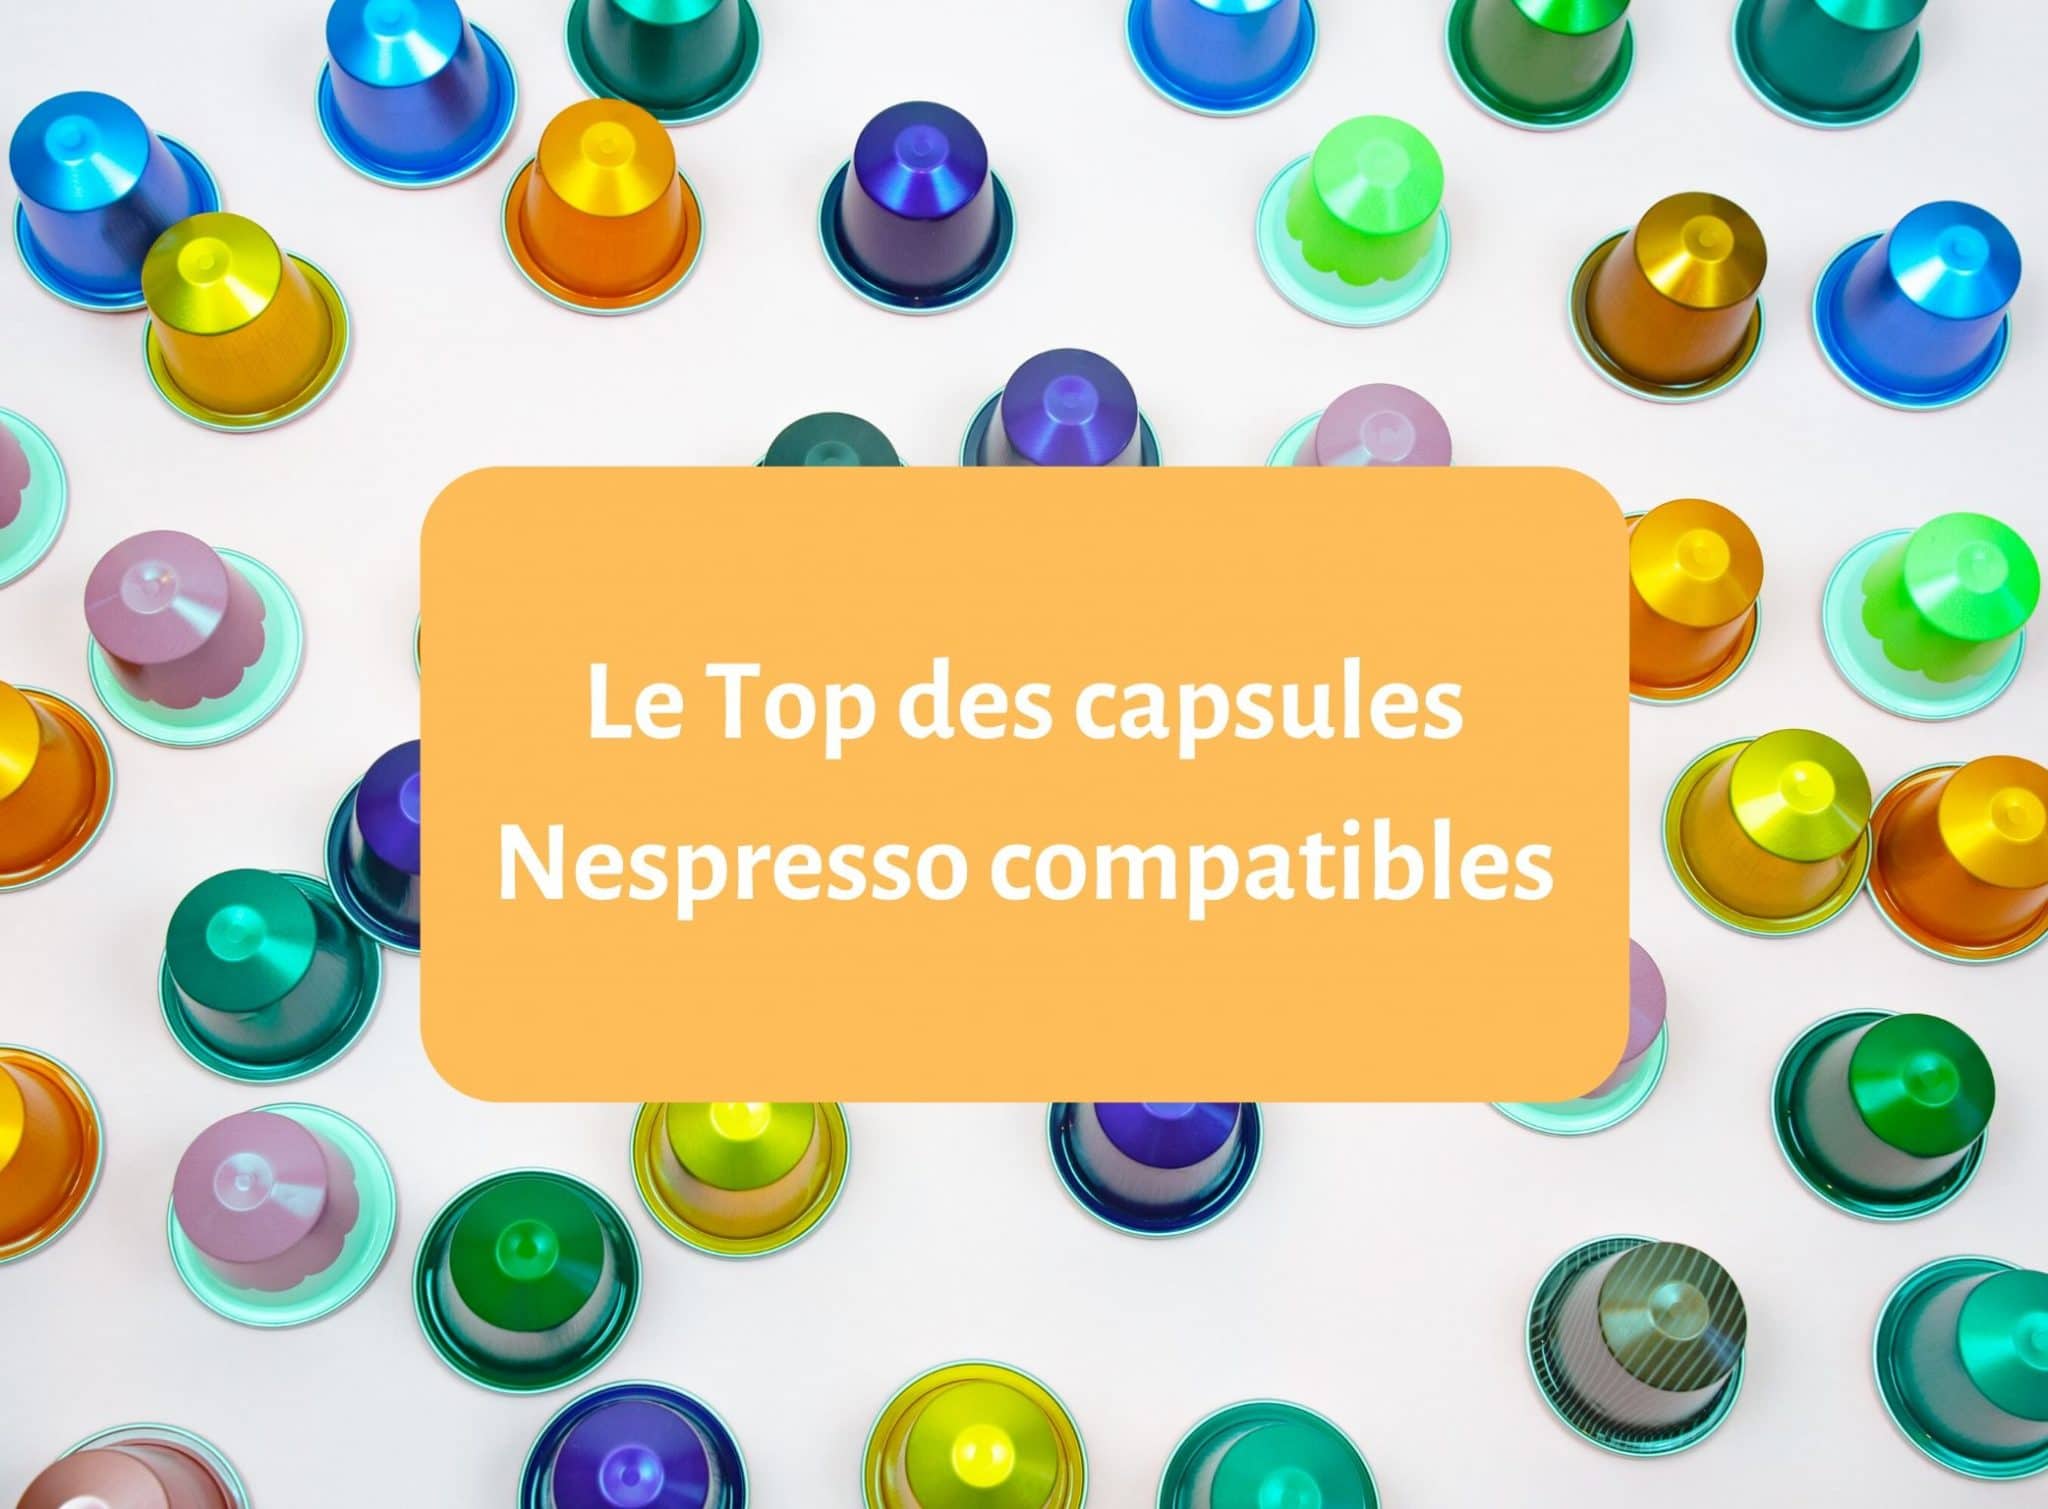 Les 7 meilleures capsules compatibles Nespresso - Guide complet [year] 2